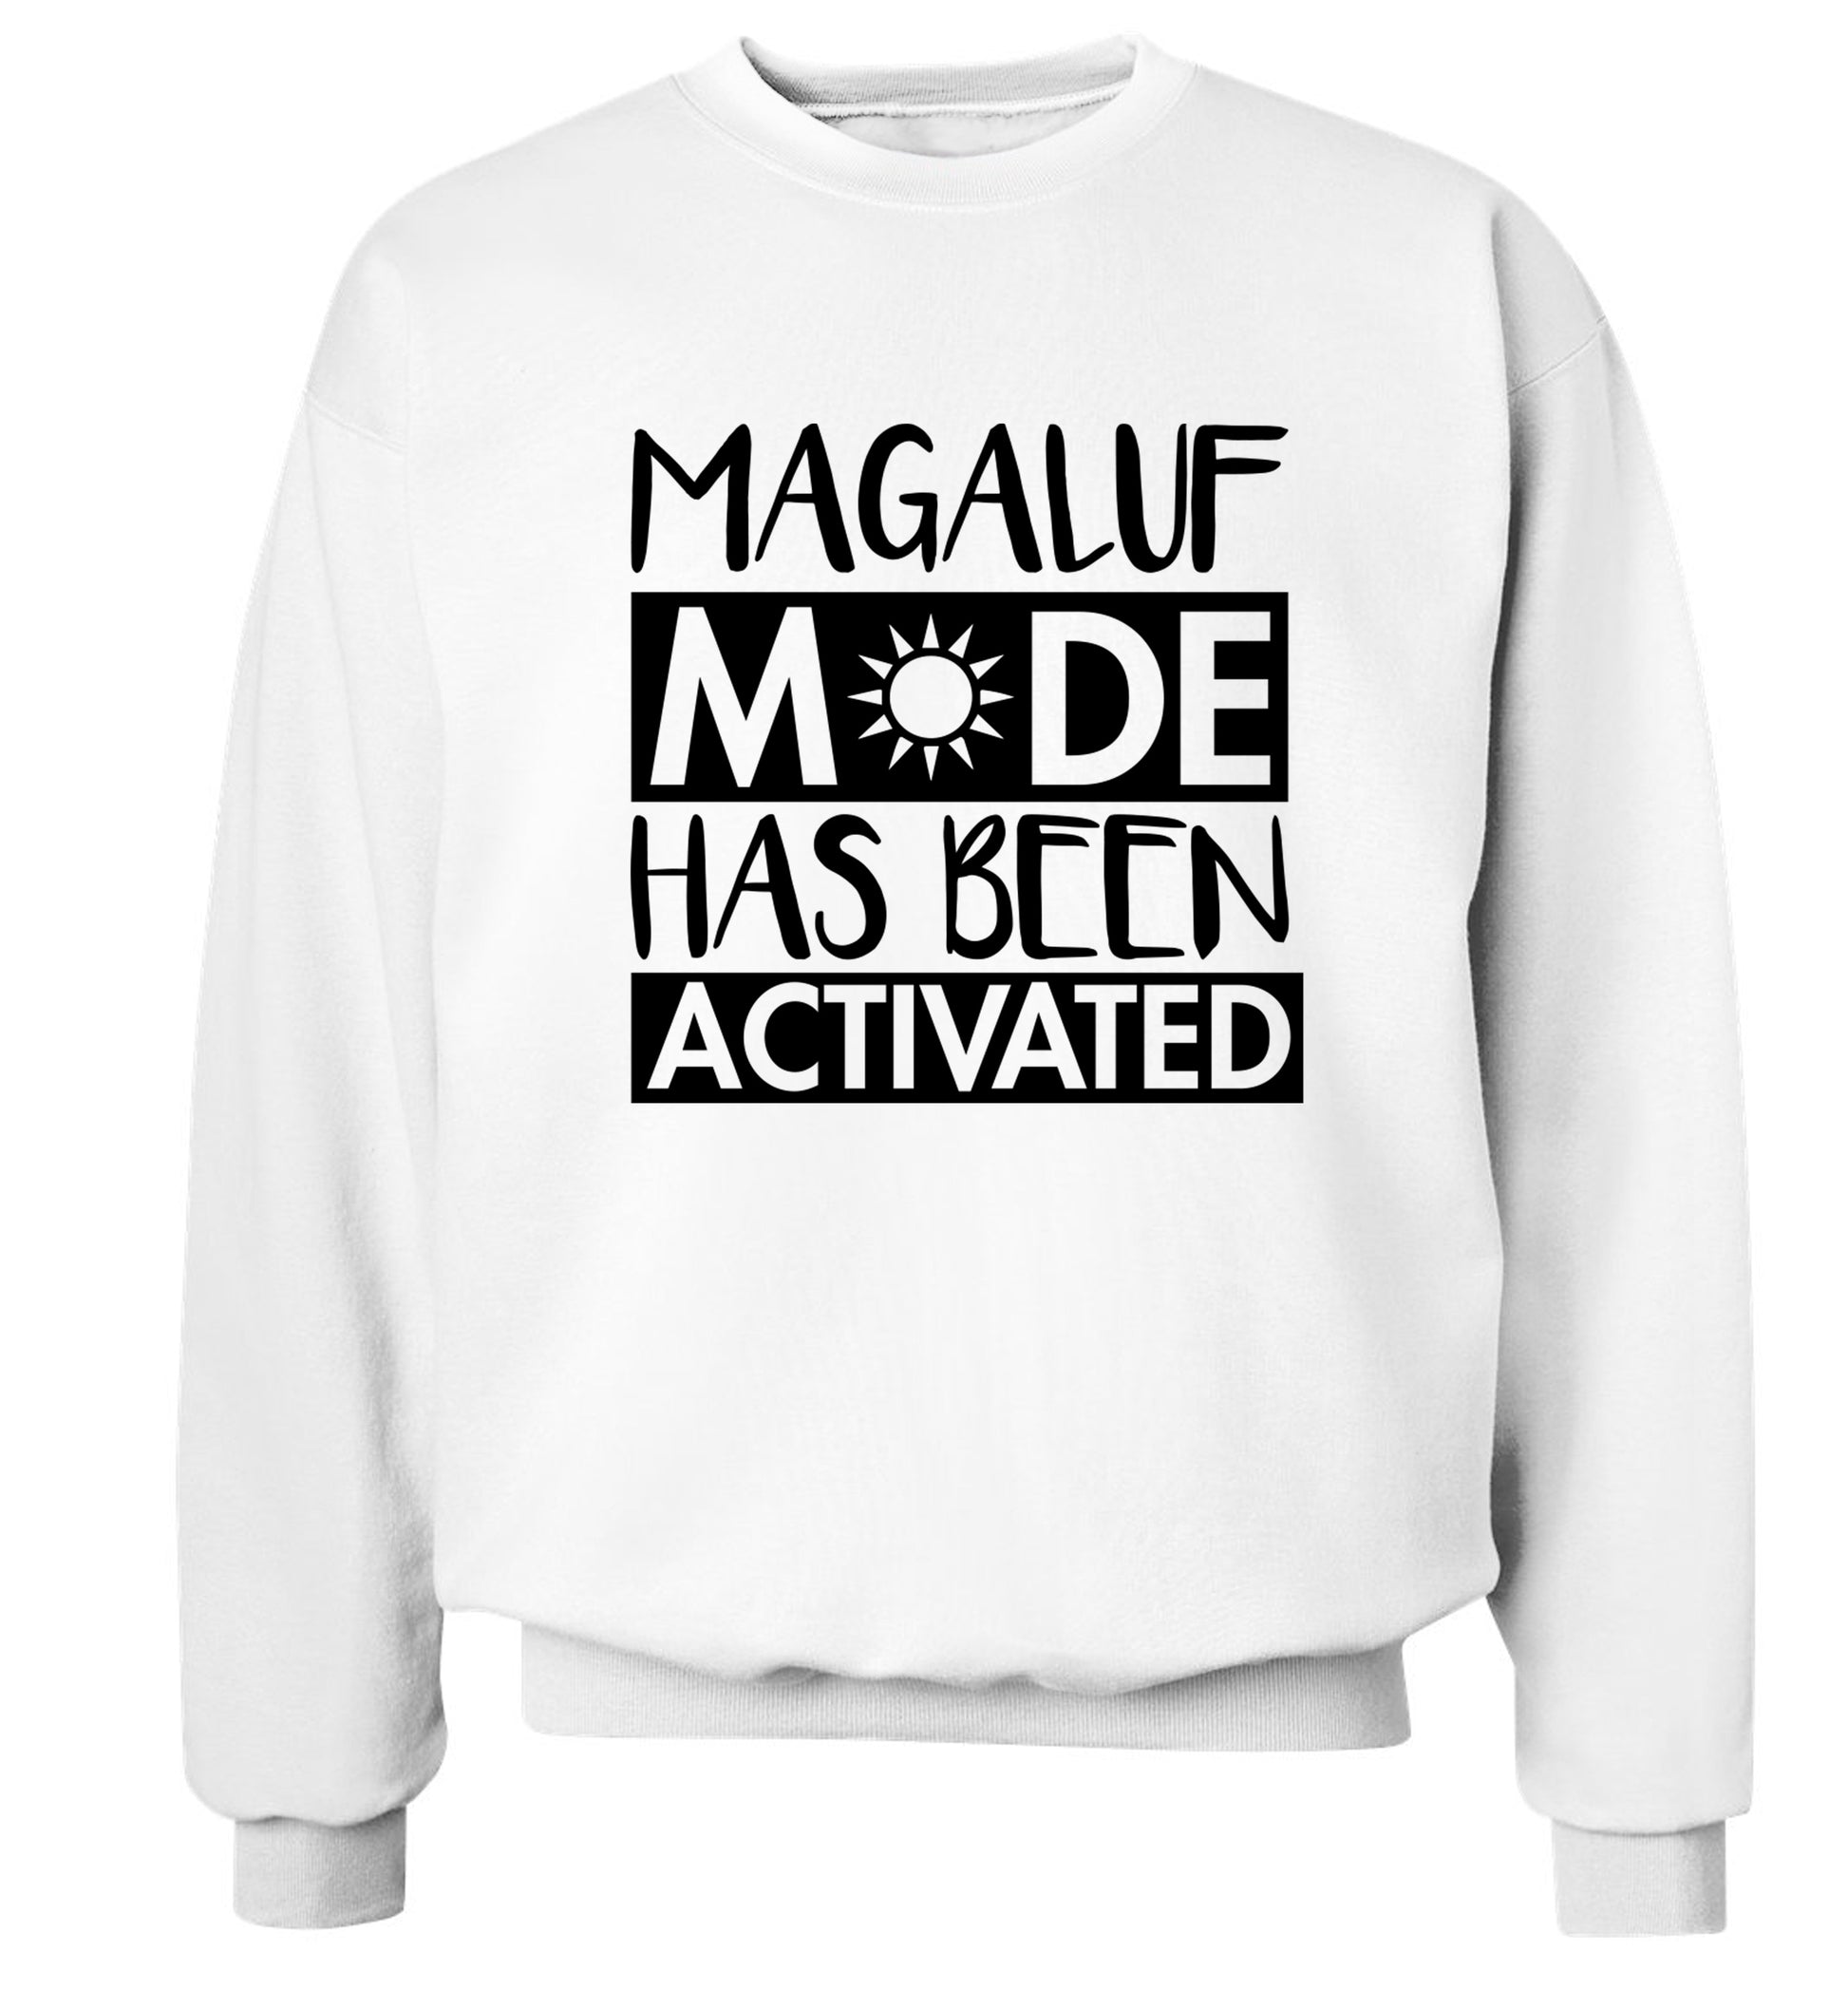 Magaluf mode has been activated Adult's unisex white Sweater 2XL